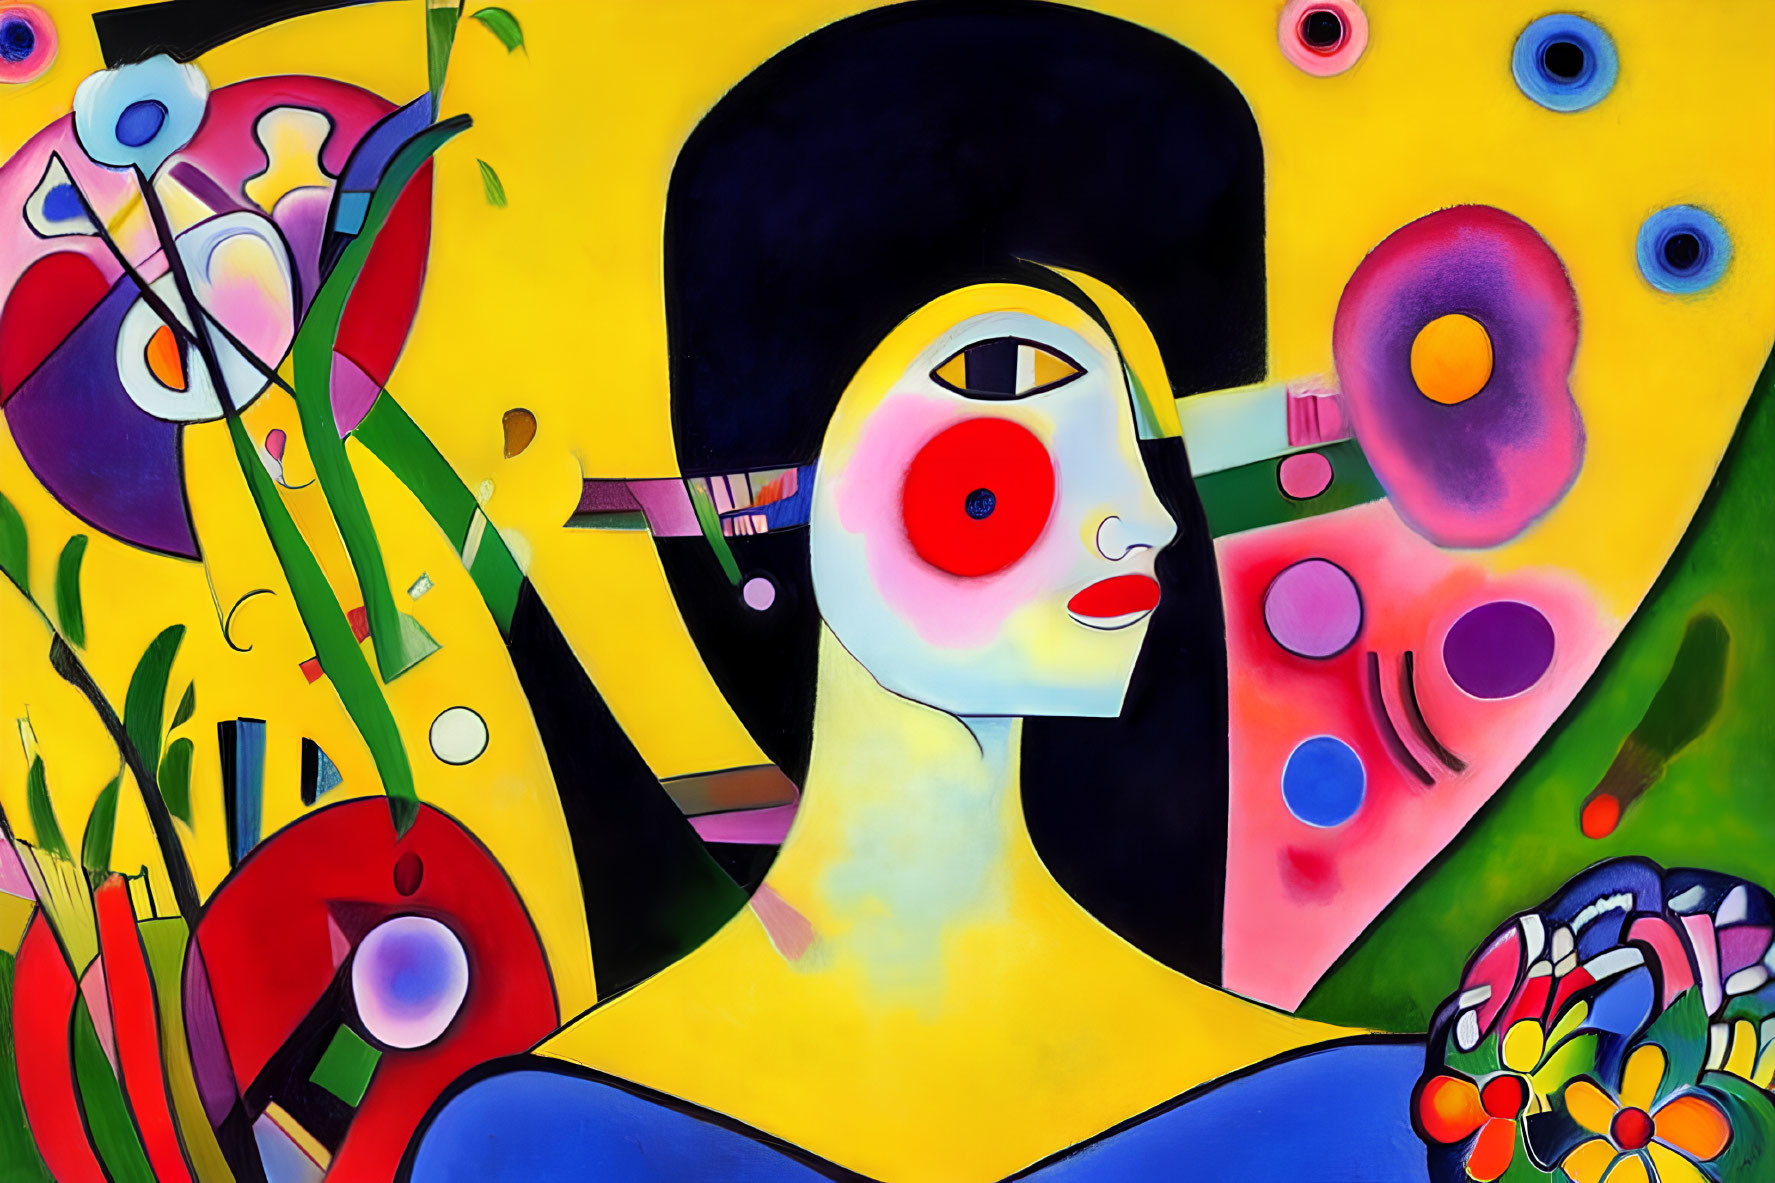 Vibrant Abstract Painting with Stylized Female Figure and Floral Motifs